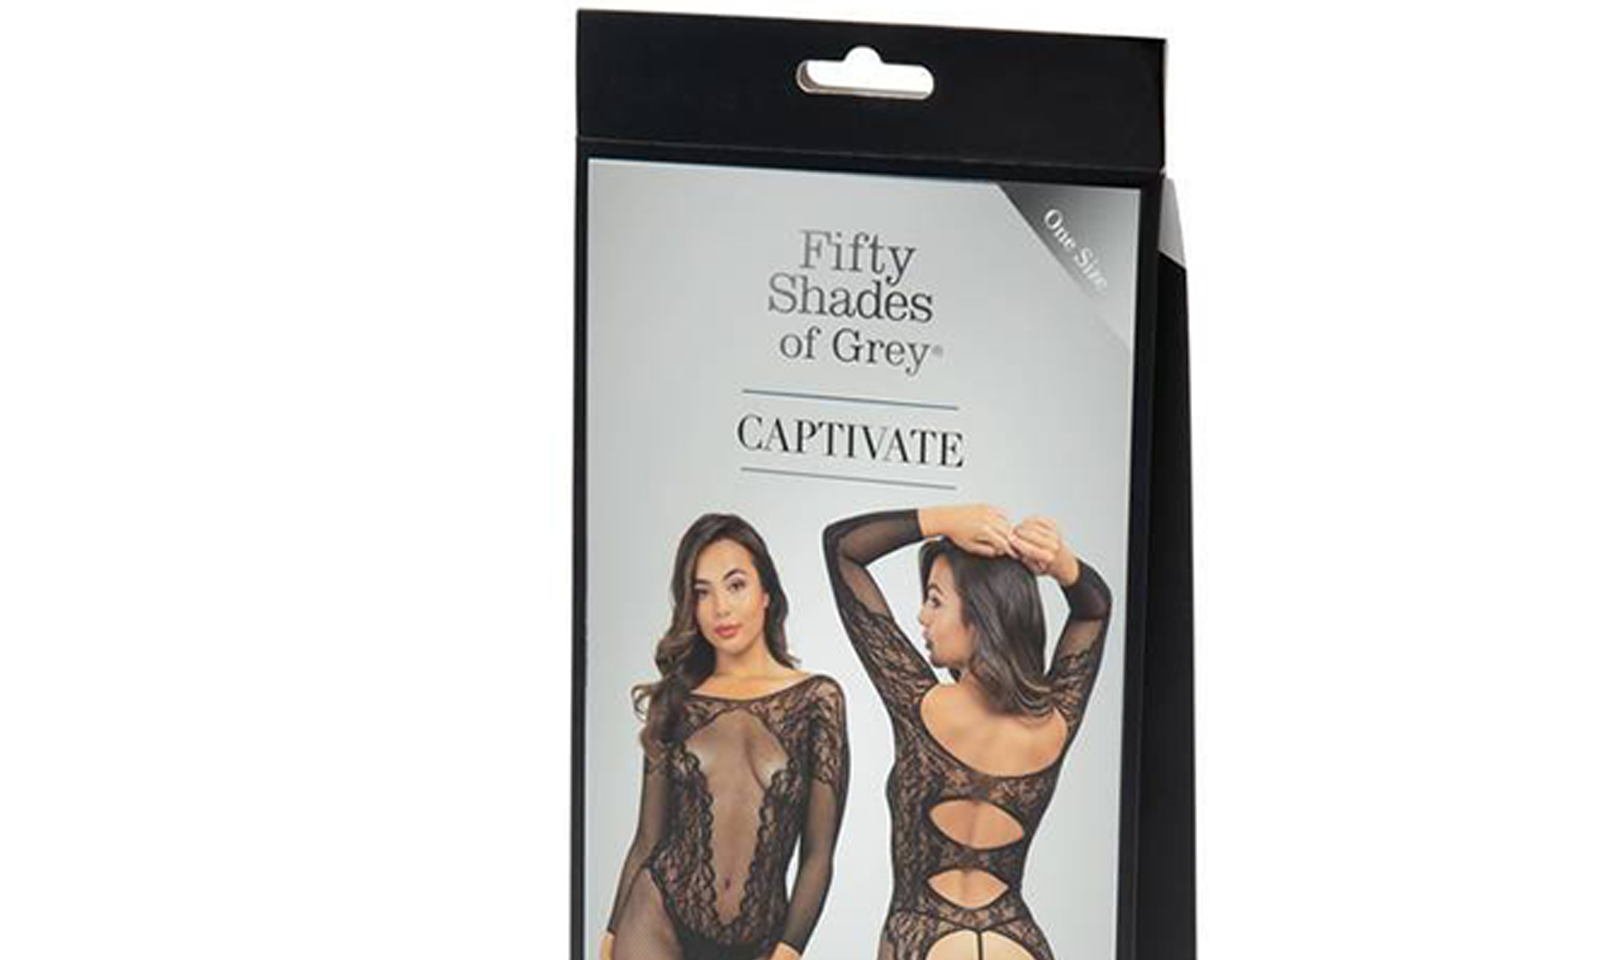 Lovehoney Releases Lingerie as 'Fifty Shades of Grey' Turns 10